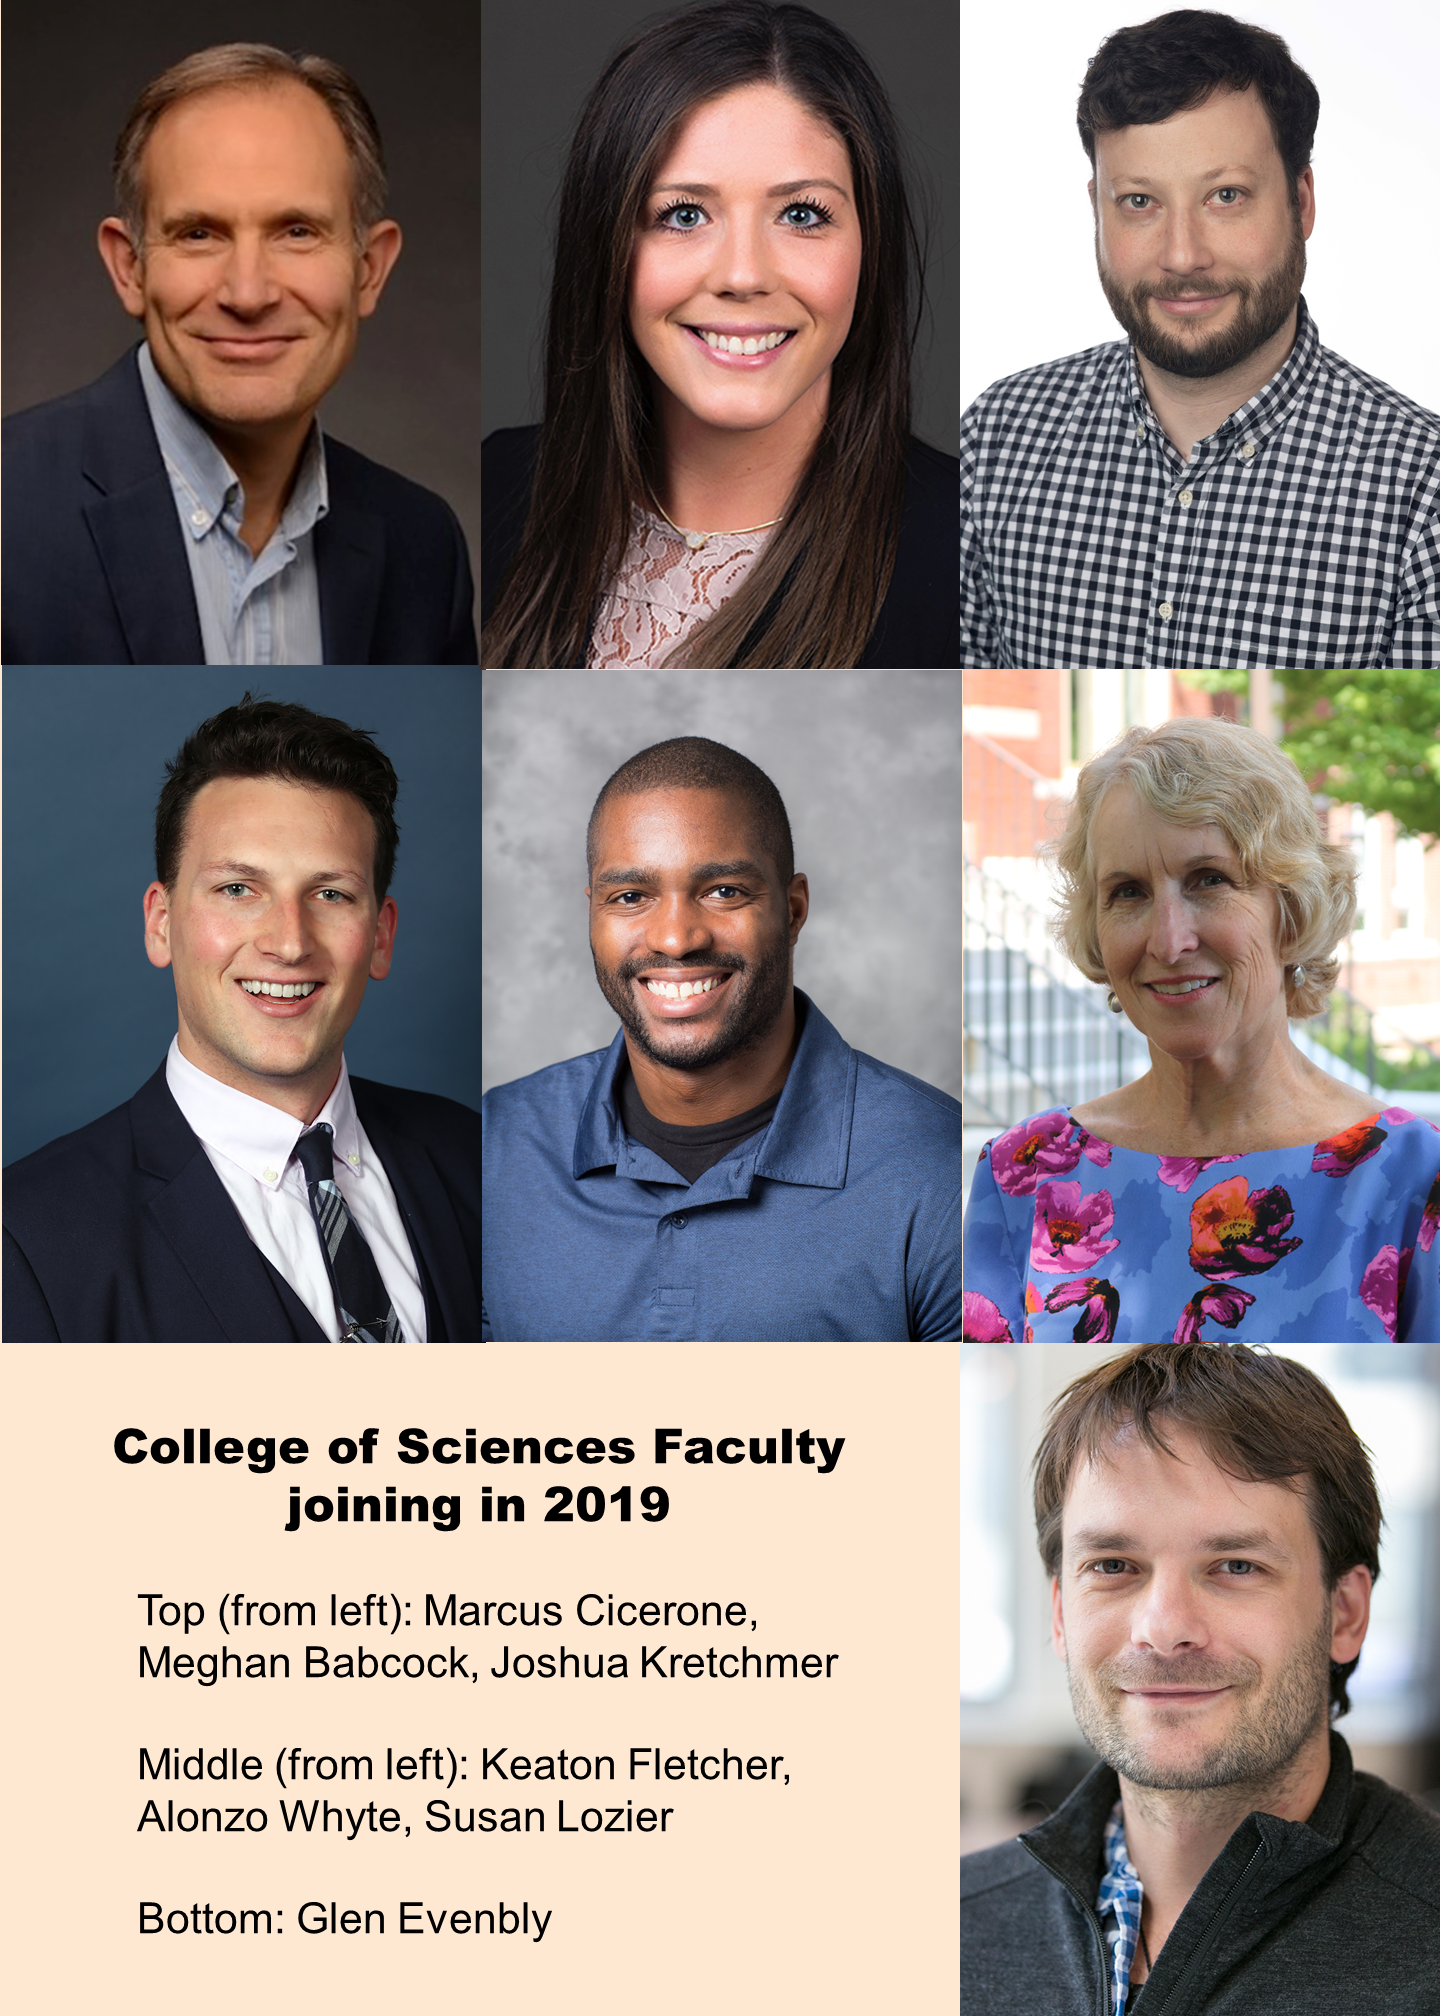 Faculty who joined in 2019